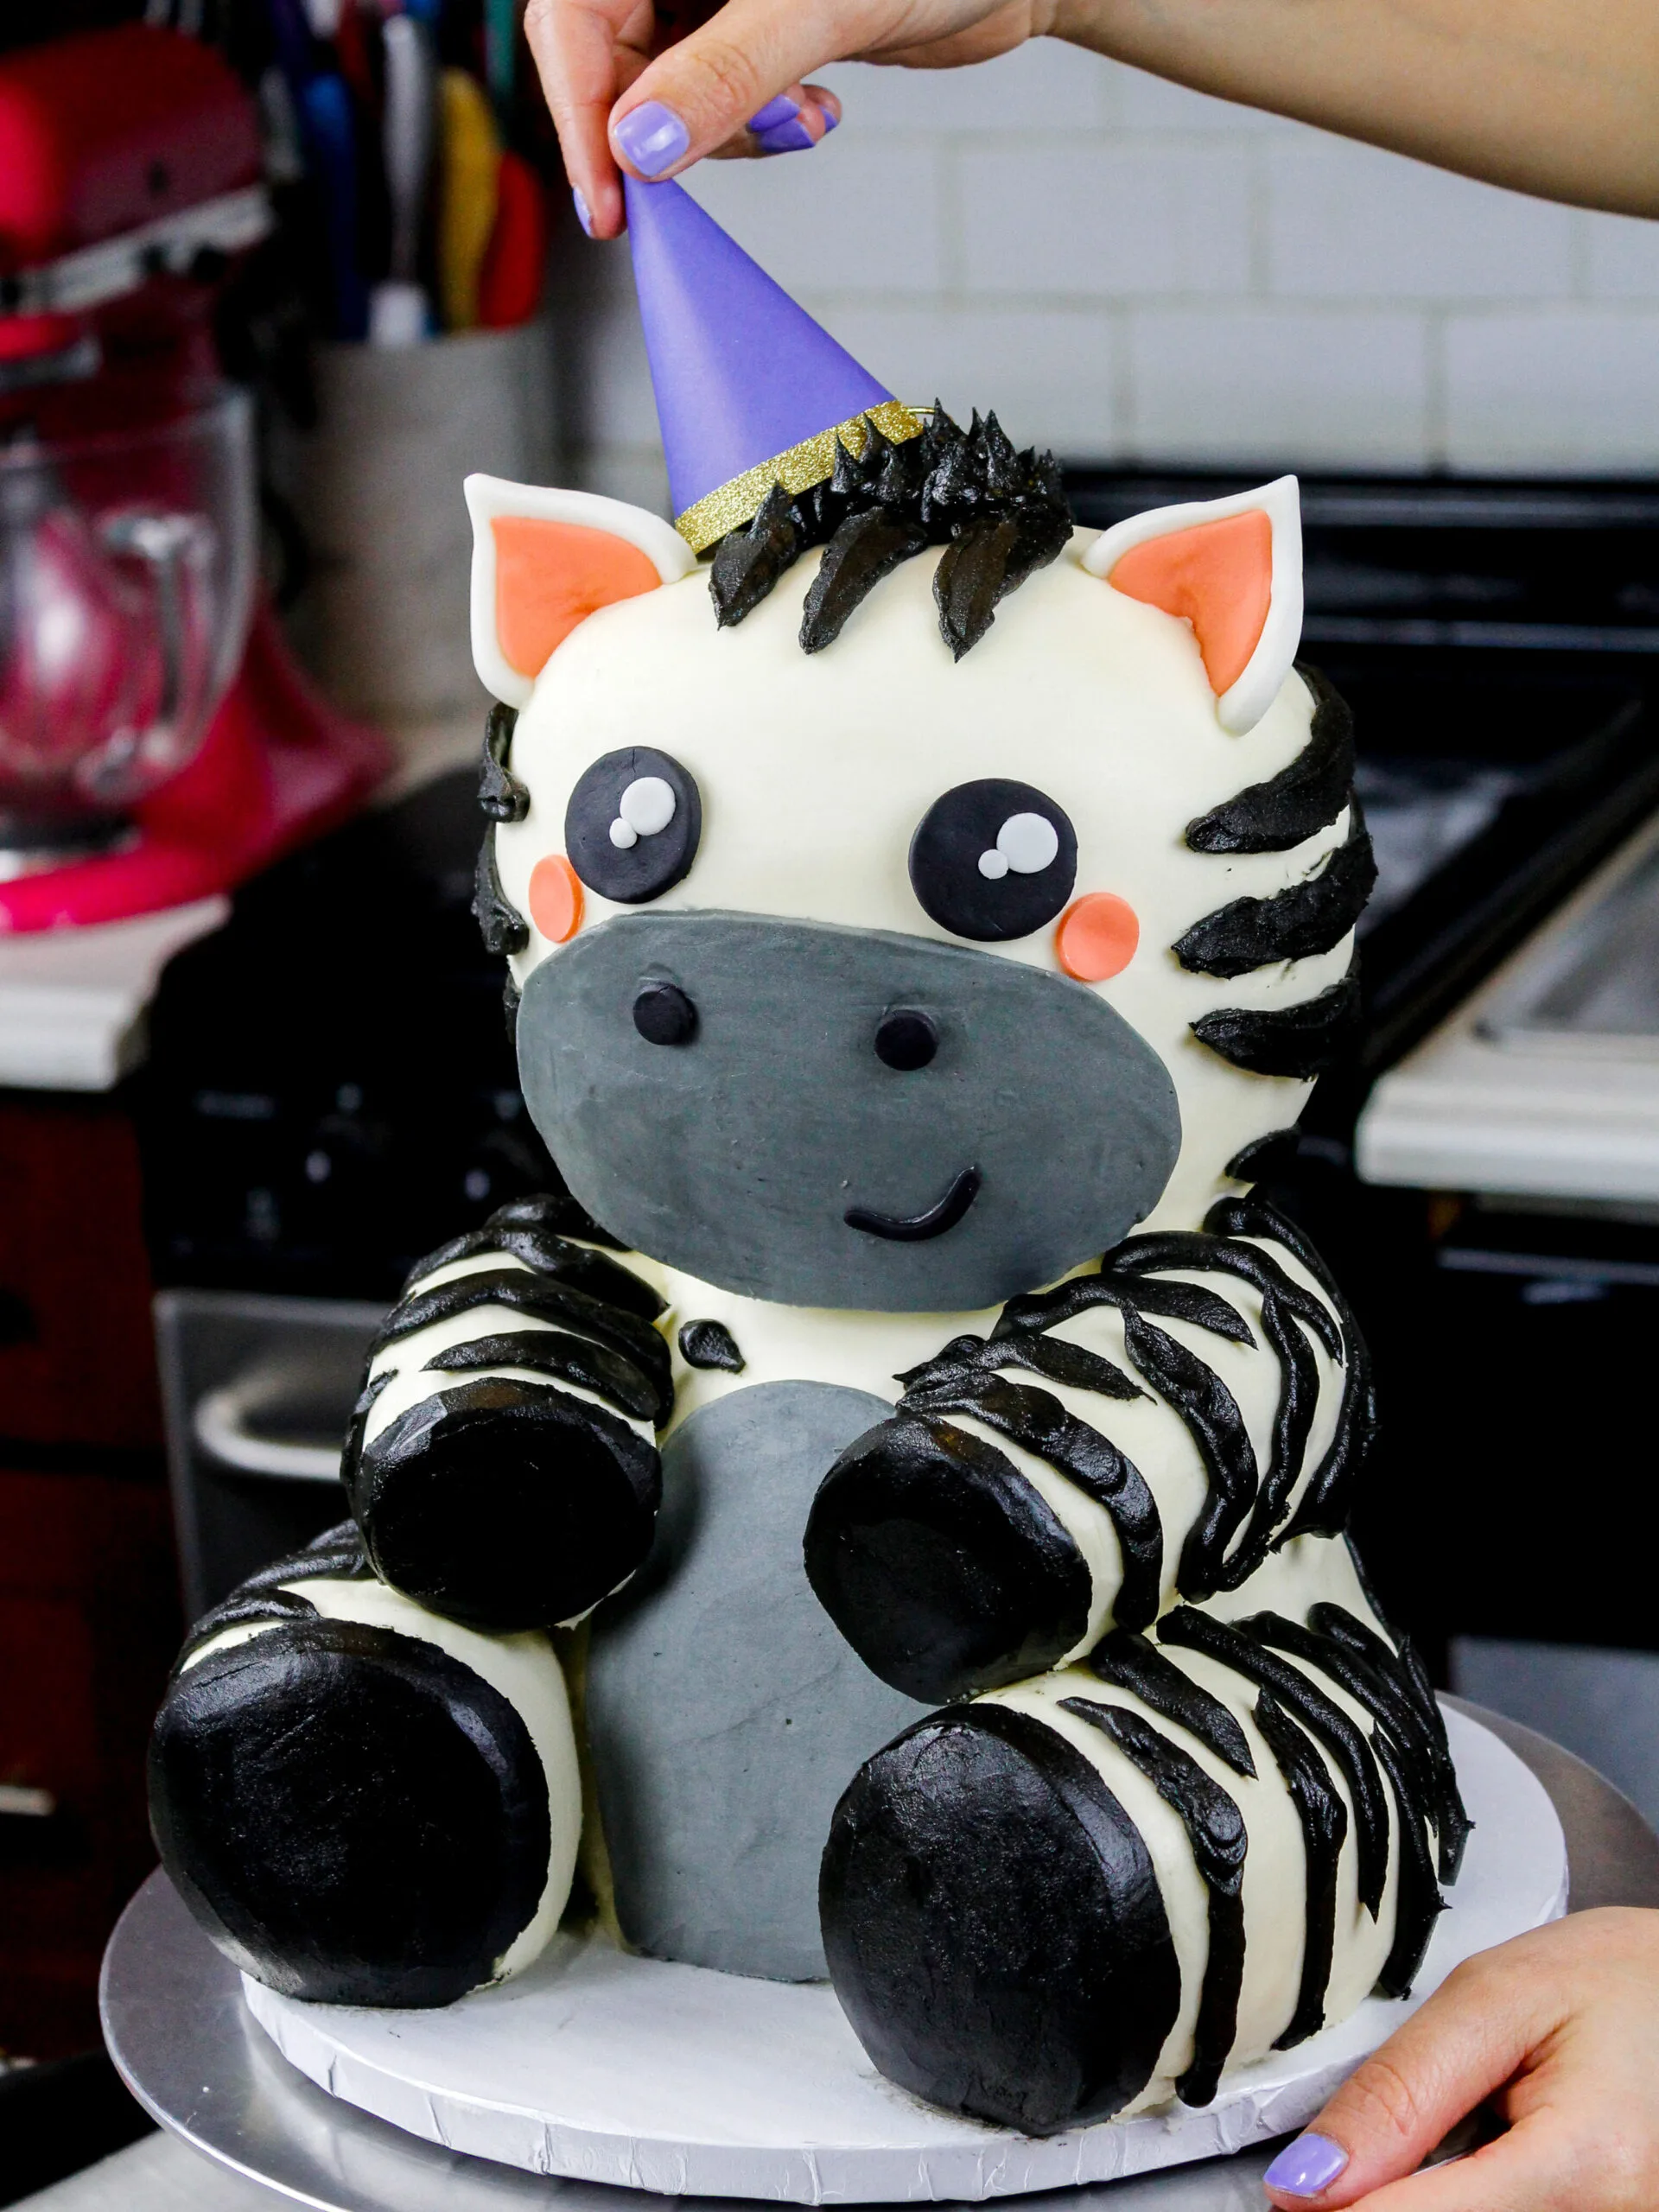 image of an adorable baby zebra cake made for a birthday party